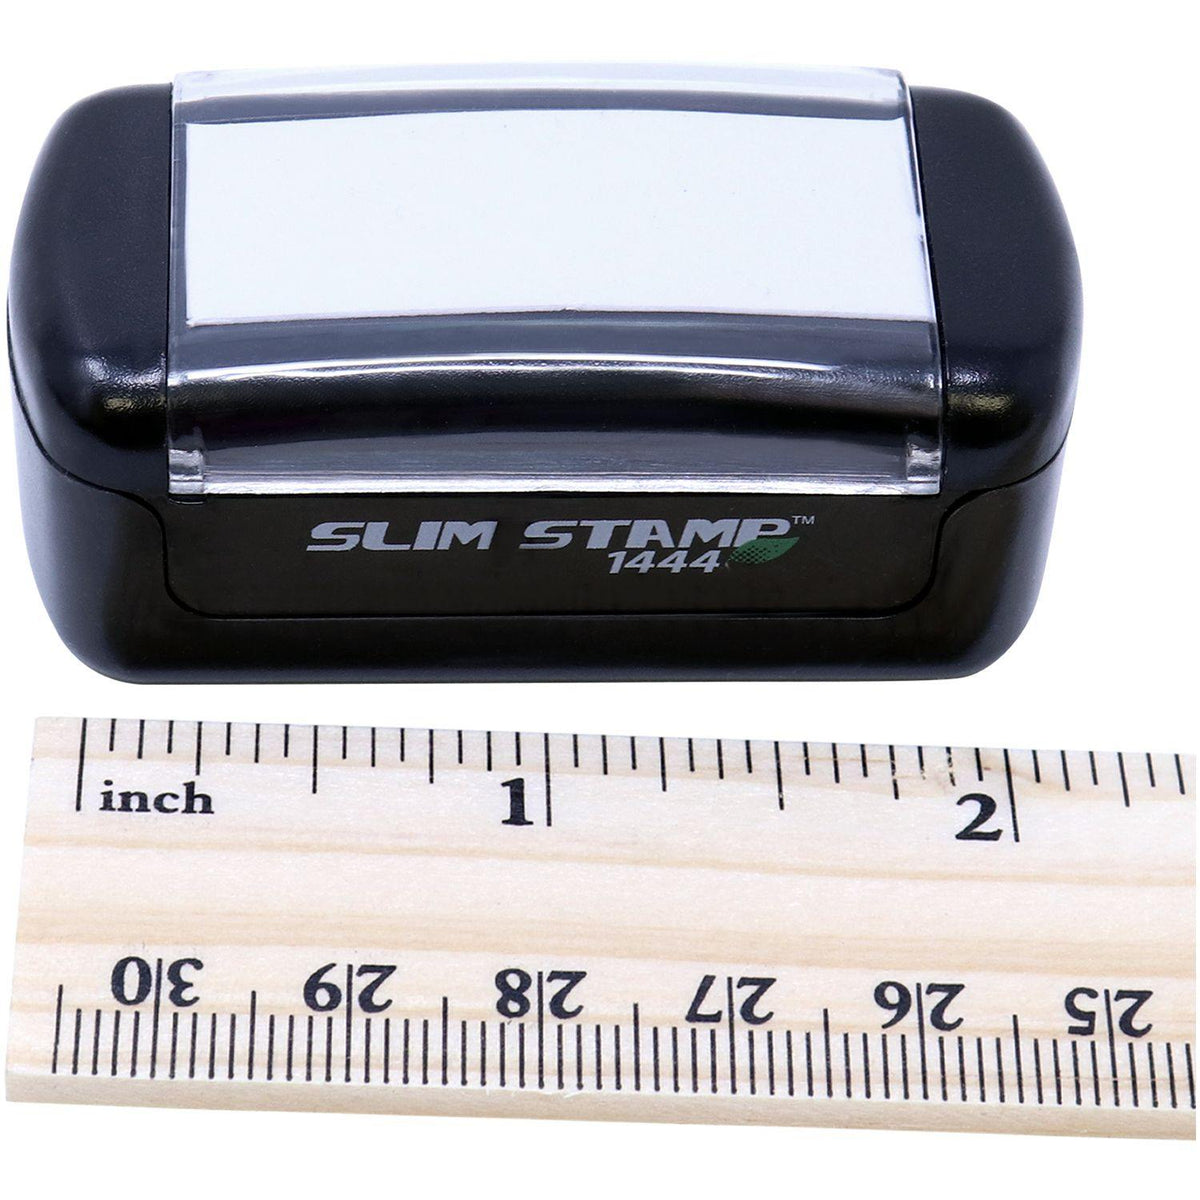 Measurement Slim Pre-Inked Please Pay Now No Statements Stamp with Ruler